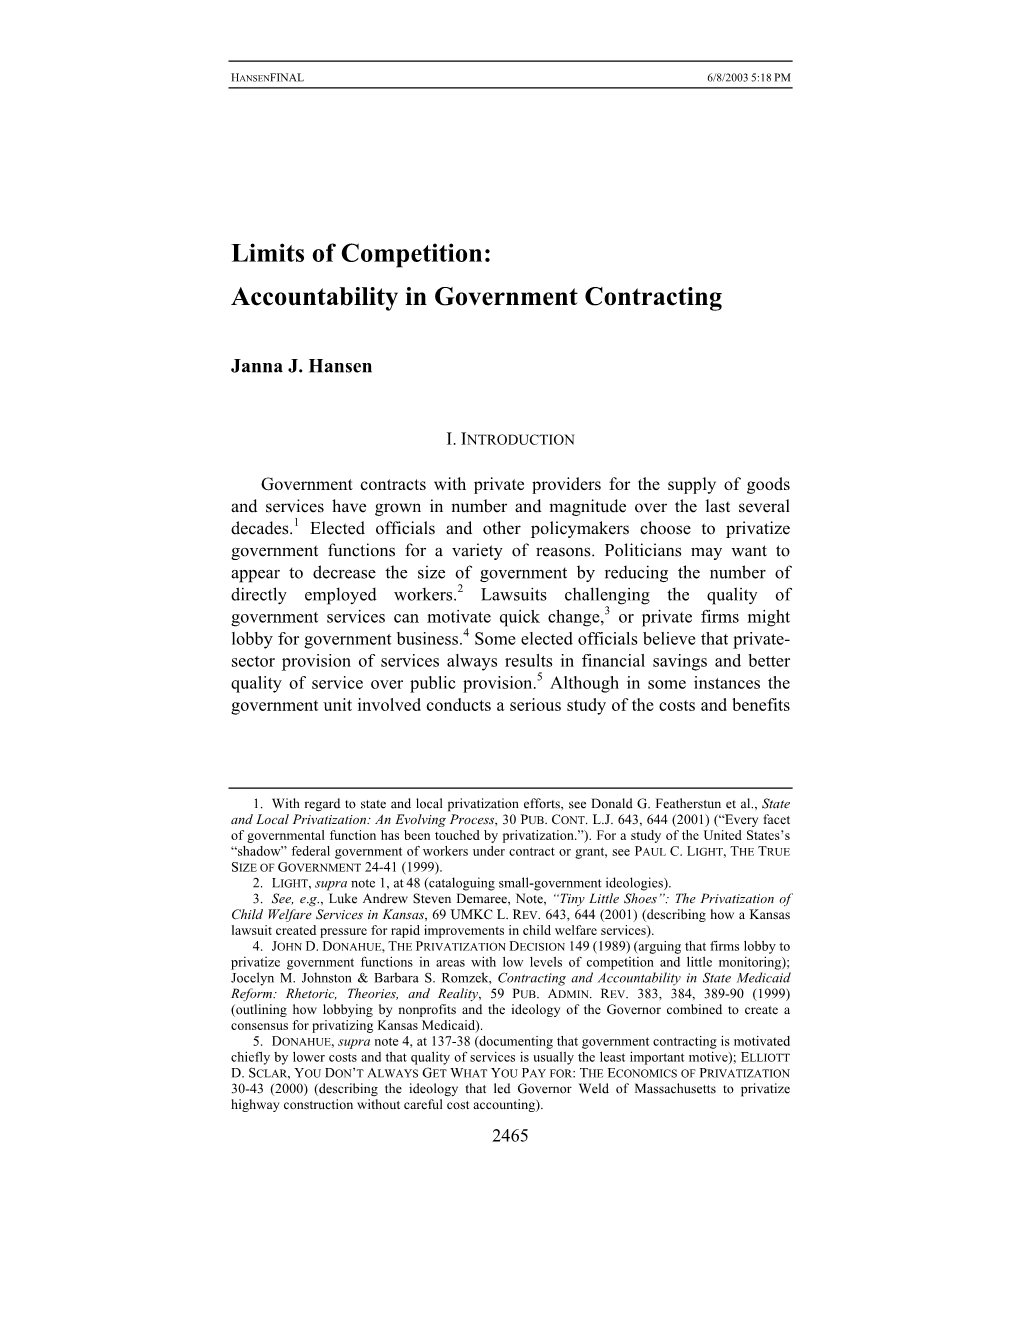 Limits of Competition: Accountability in Government Contracting